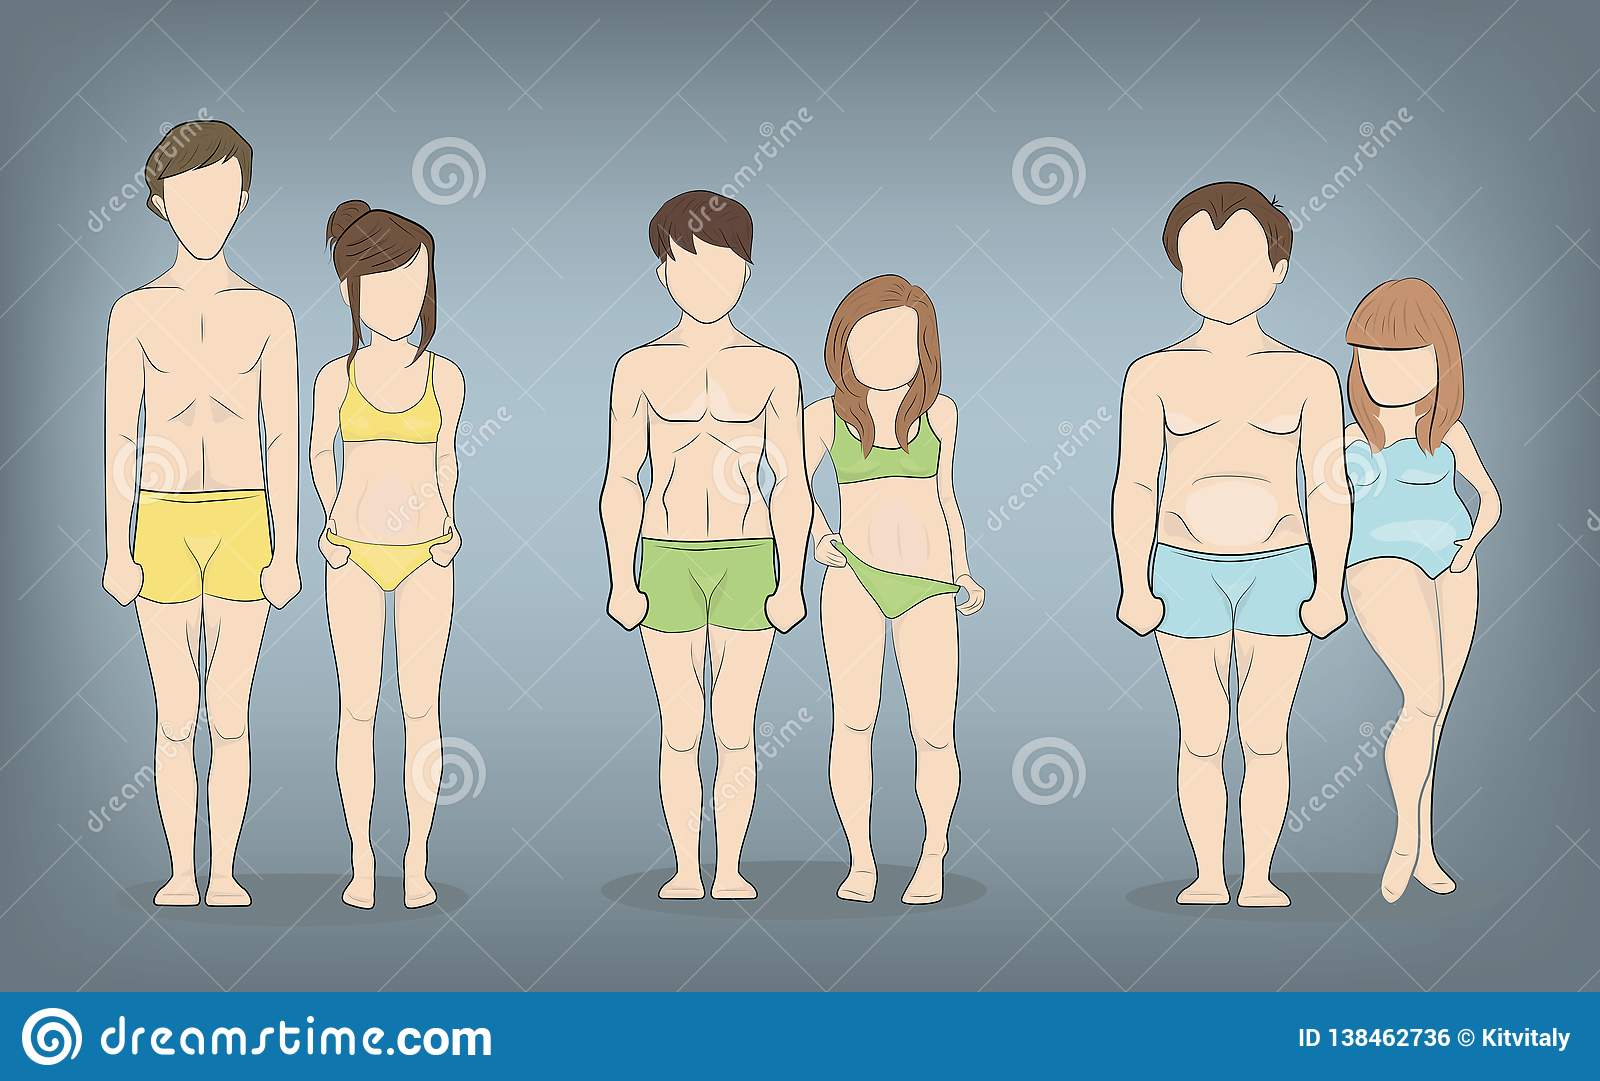 Body shape and health for muscular body types